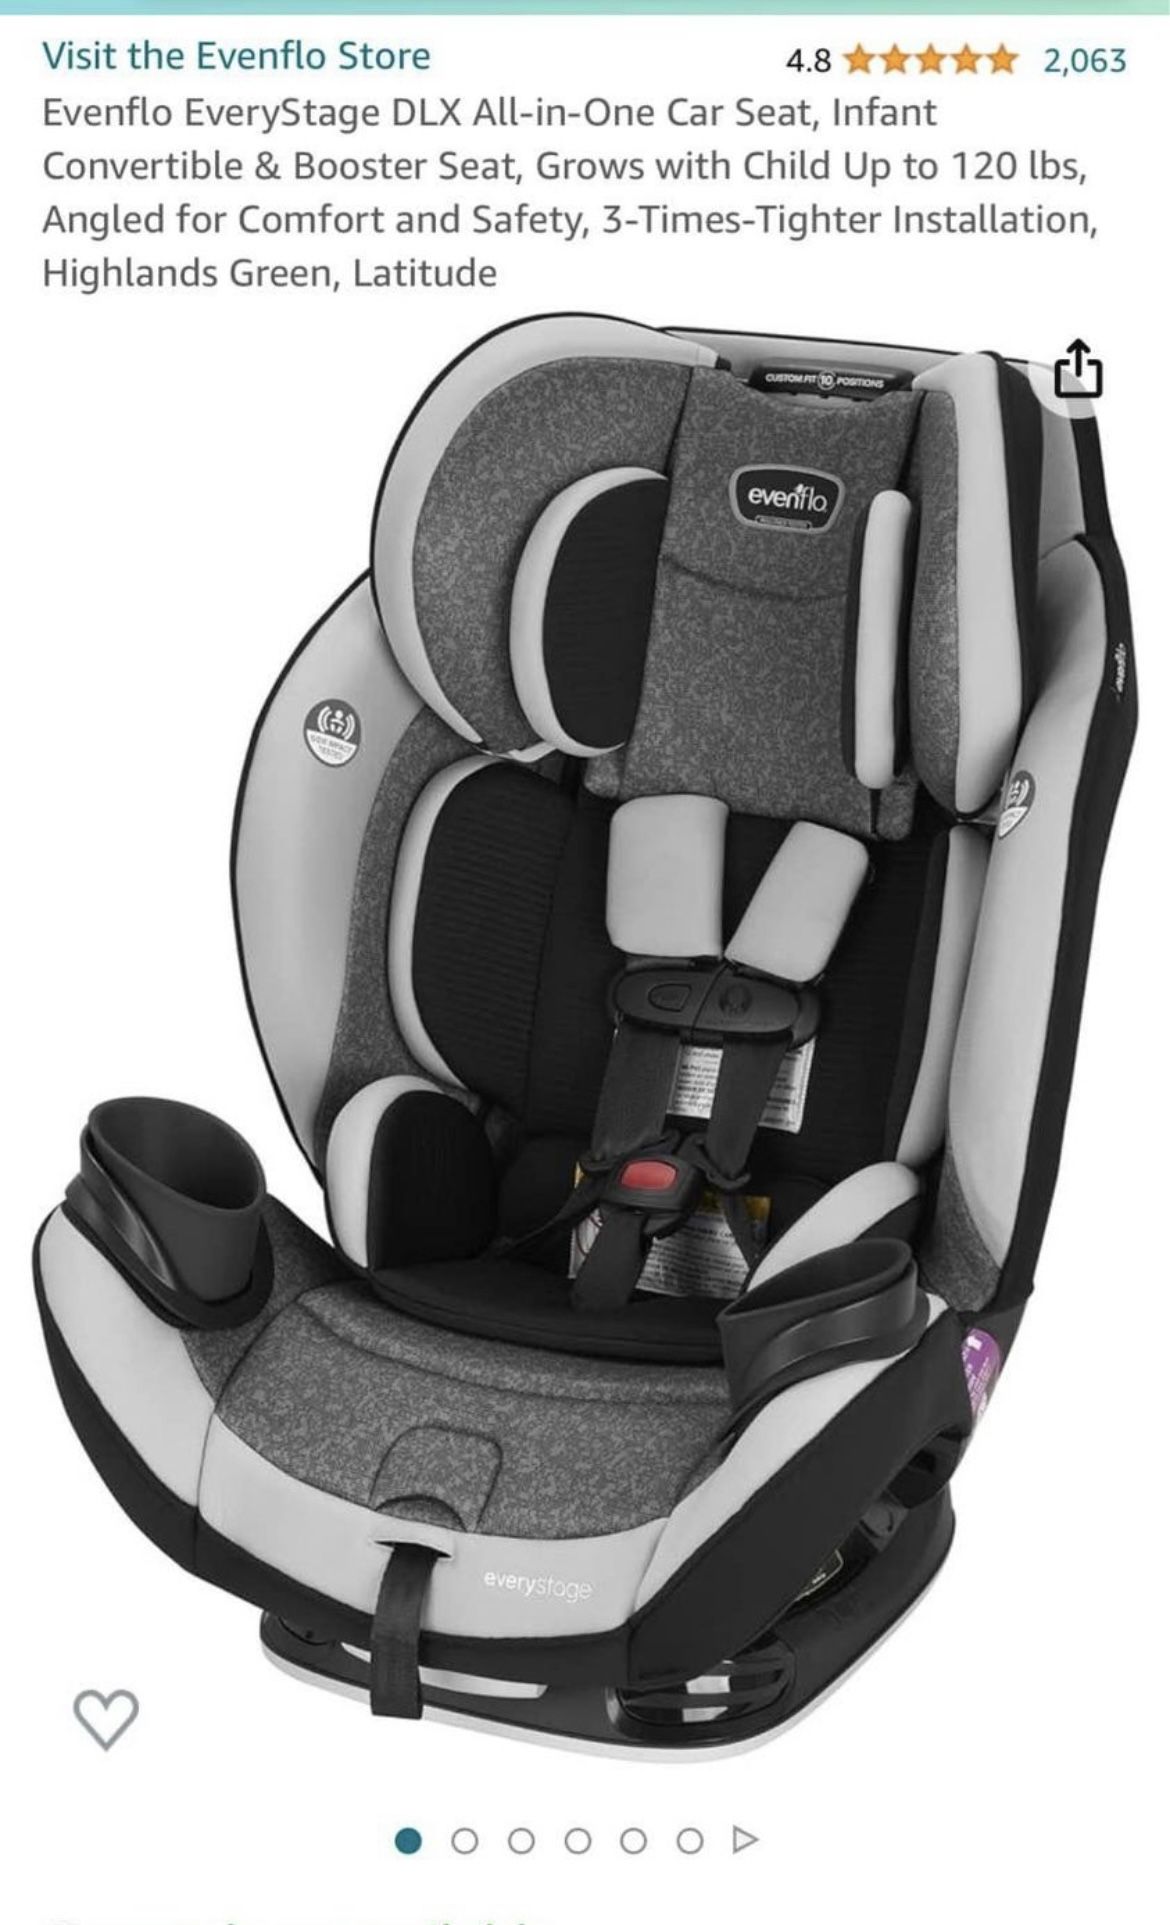 Evenflo EveryStage DLX All-in-One Car Seat, Infant+Convertible+Booster Seat